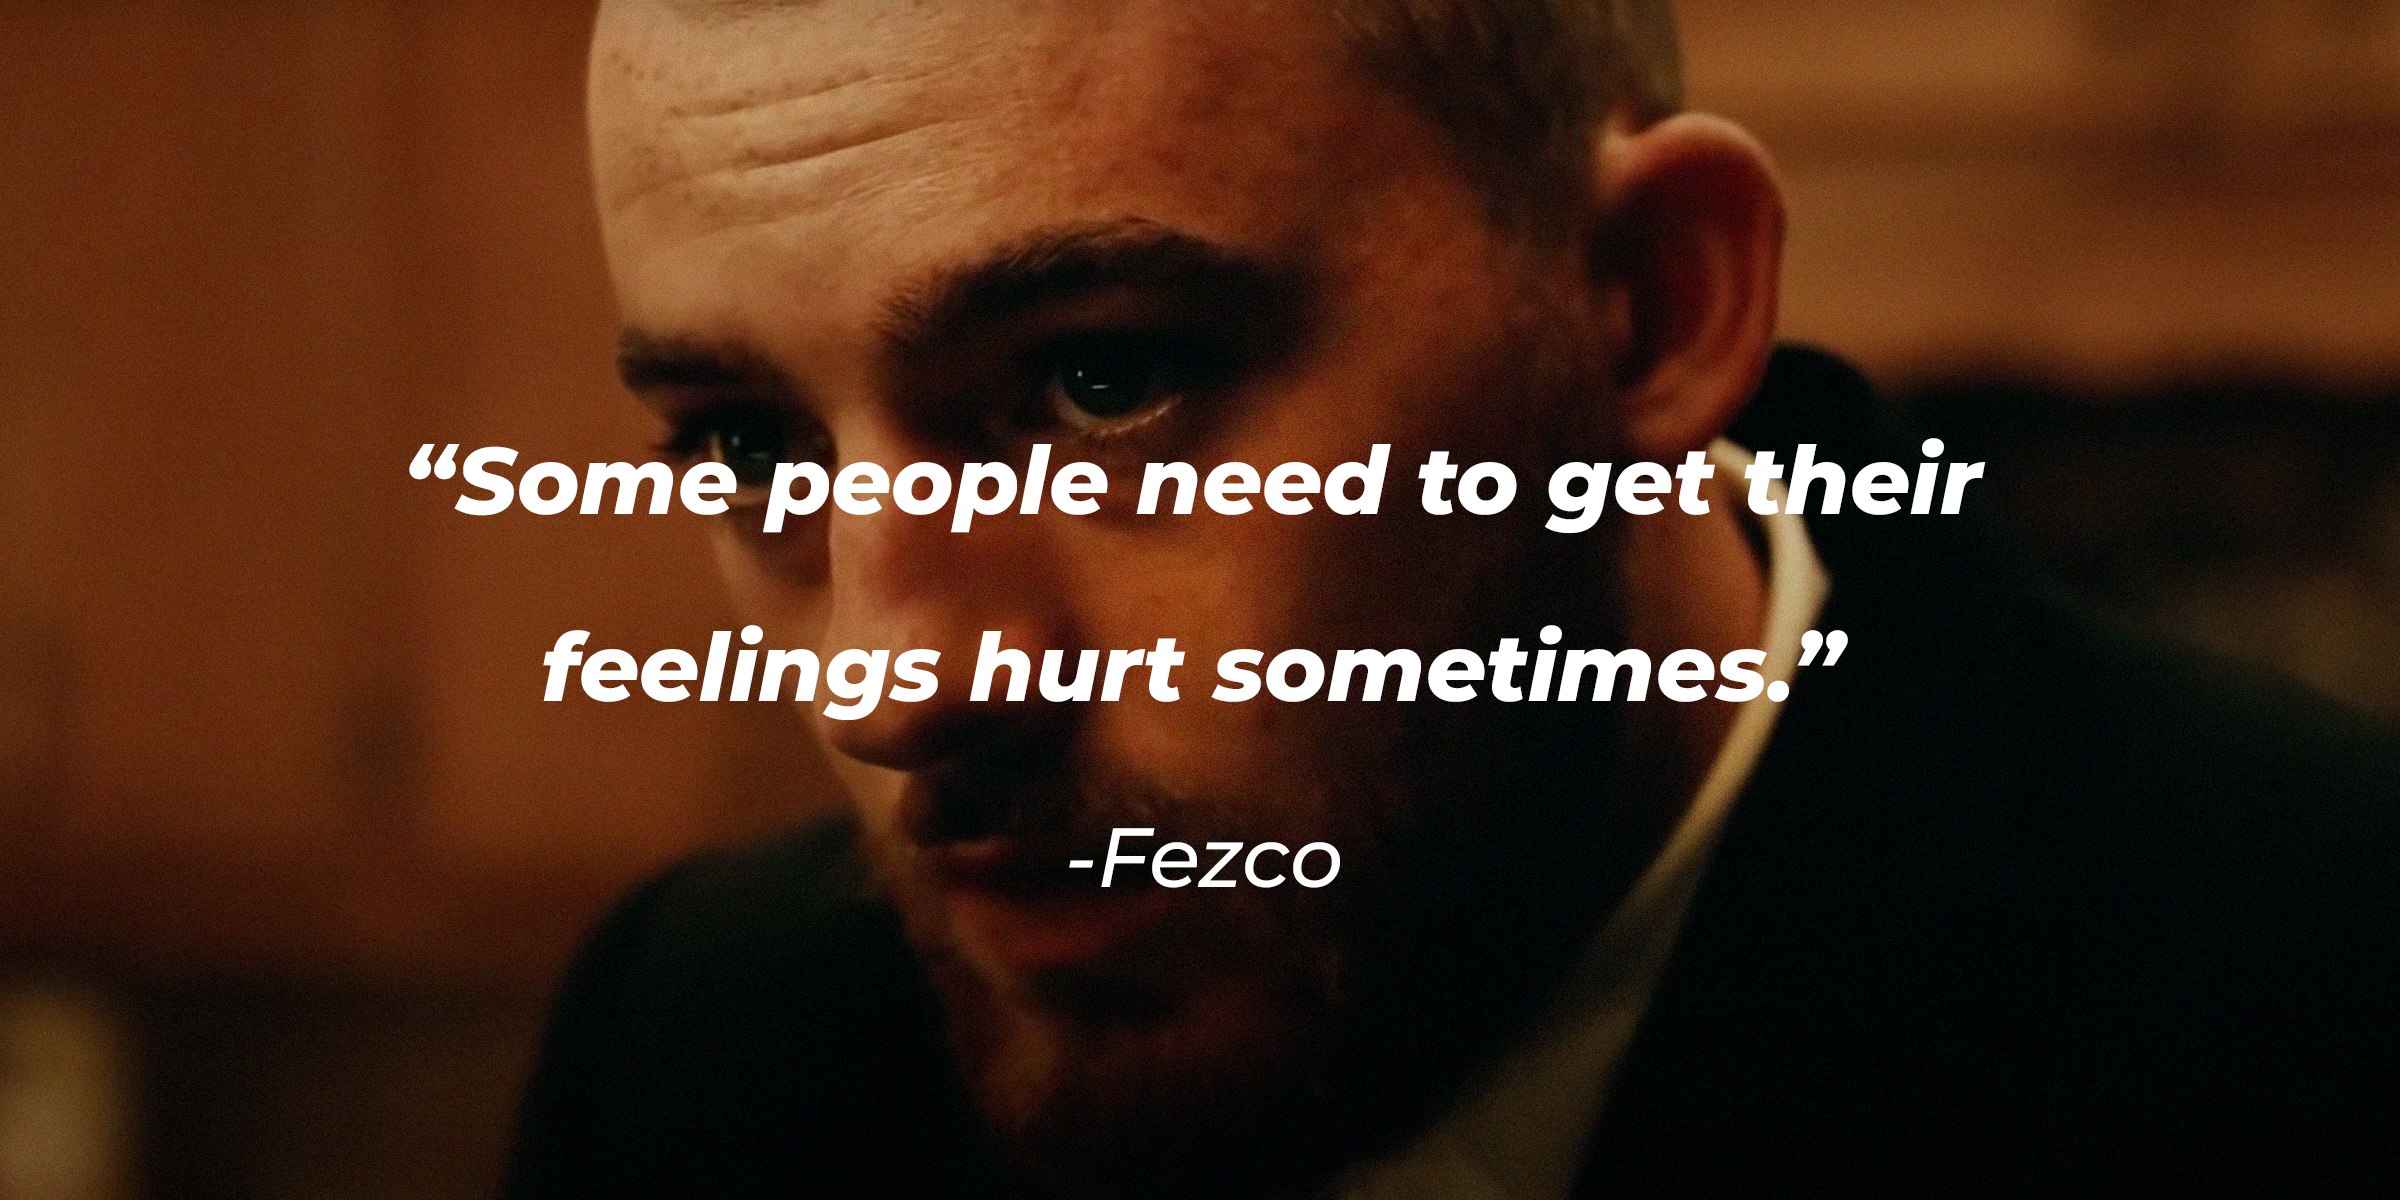 Fezco, with his quote: “Some people need to get their feelings hurt sometimes." | Source: youtube.com/EuphoriaHBO